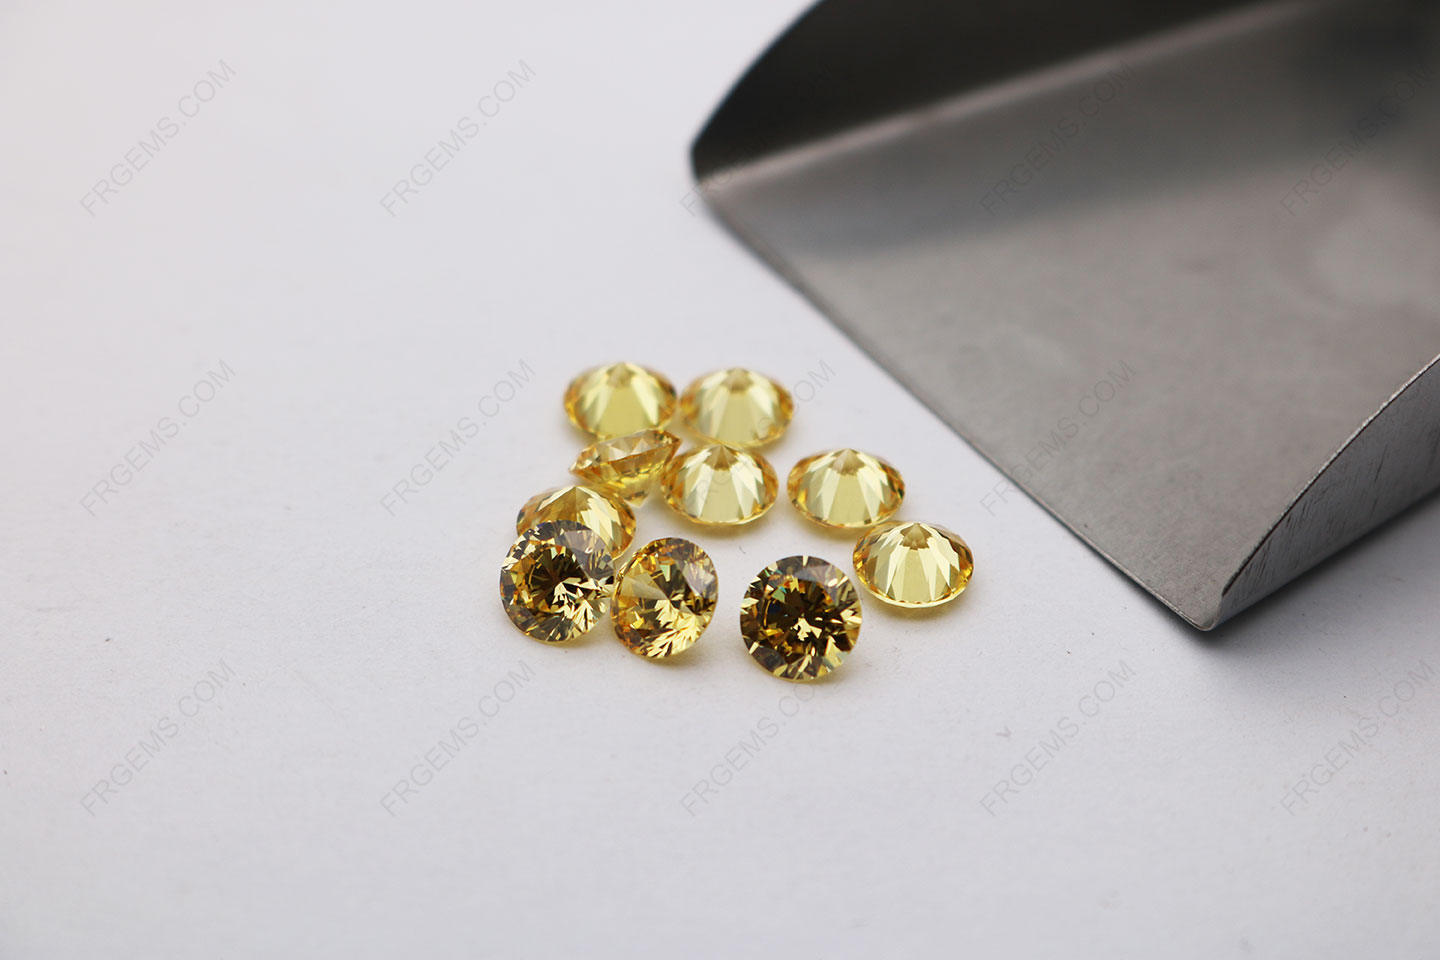 Cubic Zirconia  5A best quality Golden Yellow Round Shape faceted diamond Cut 6.50mm stones CZ05 IMG_3472